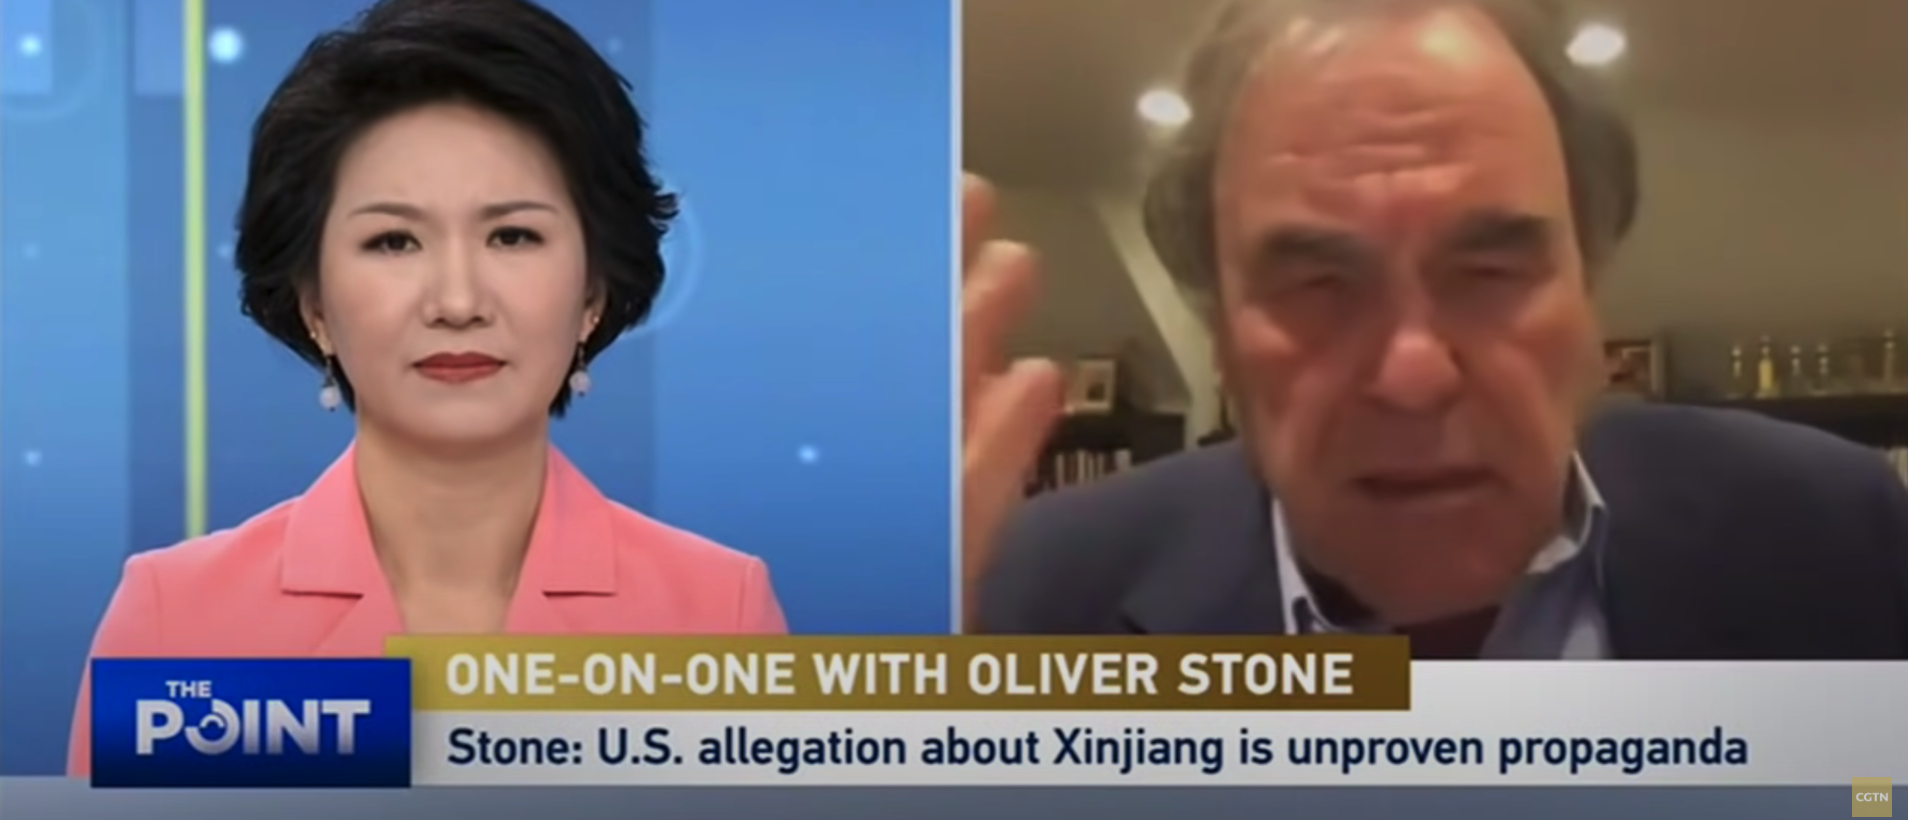 Chinese state media, CGTN, interviewed American film director Oliver Stone in October 2021, who downplayed the threat of the Soviet Union, called American news propaganda, insinuated Huawei was benign, and called “accusations” about the Uyghur genocide “insane,” saying there was “no proof.” [YouTube/Screenshot/CGTN]